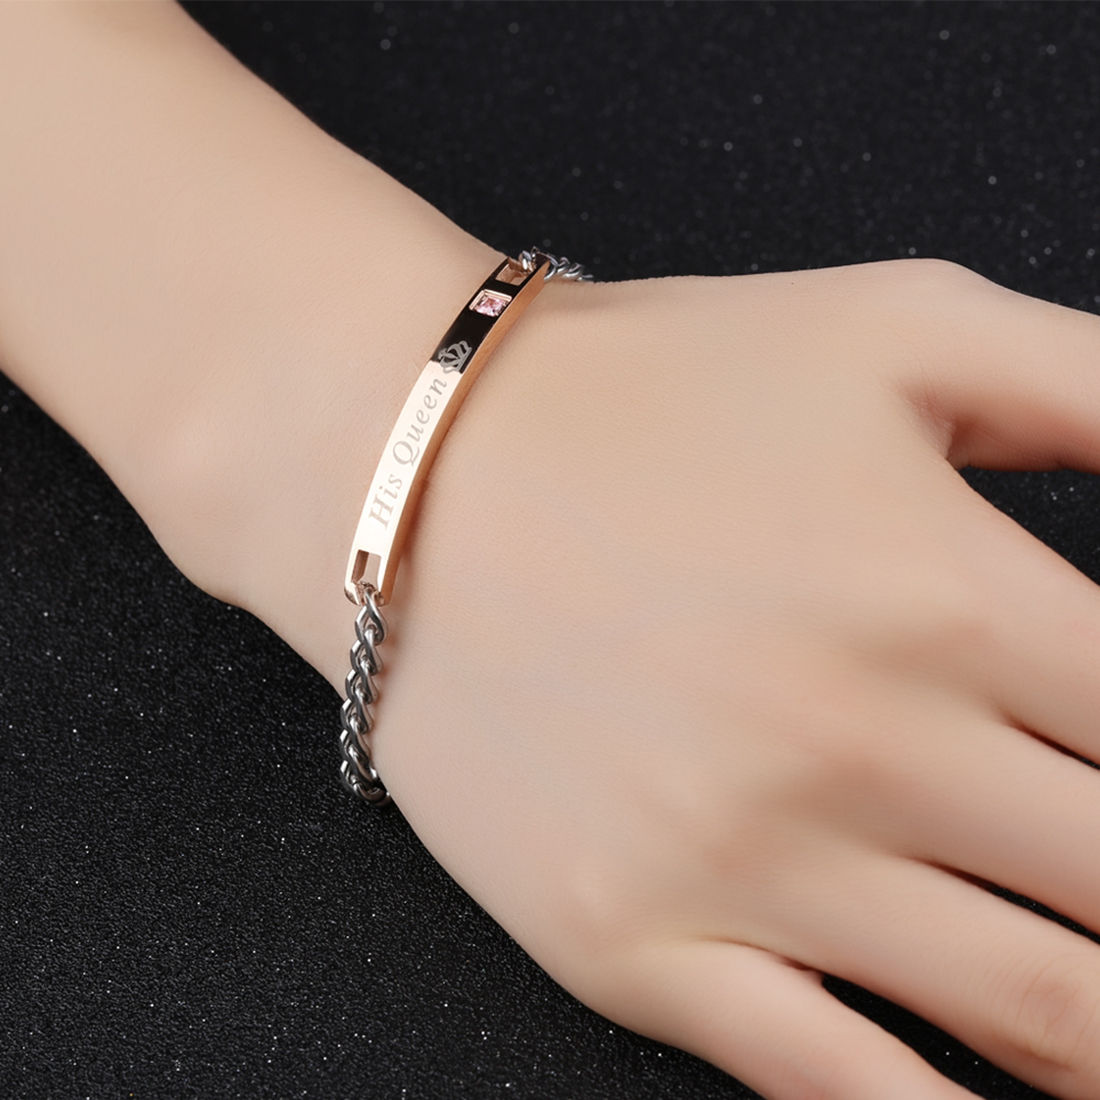 Stylish and Charming HIs Her king Queen Rose Gold and Black Couple Bracelet